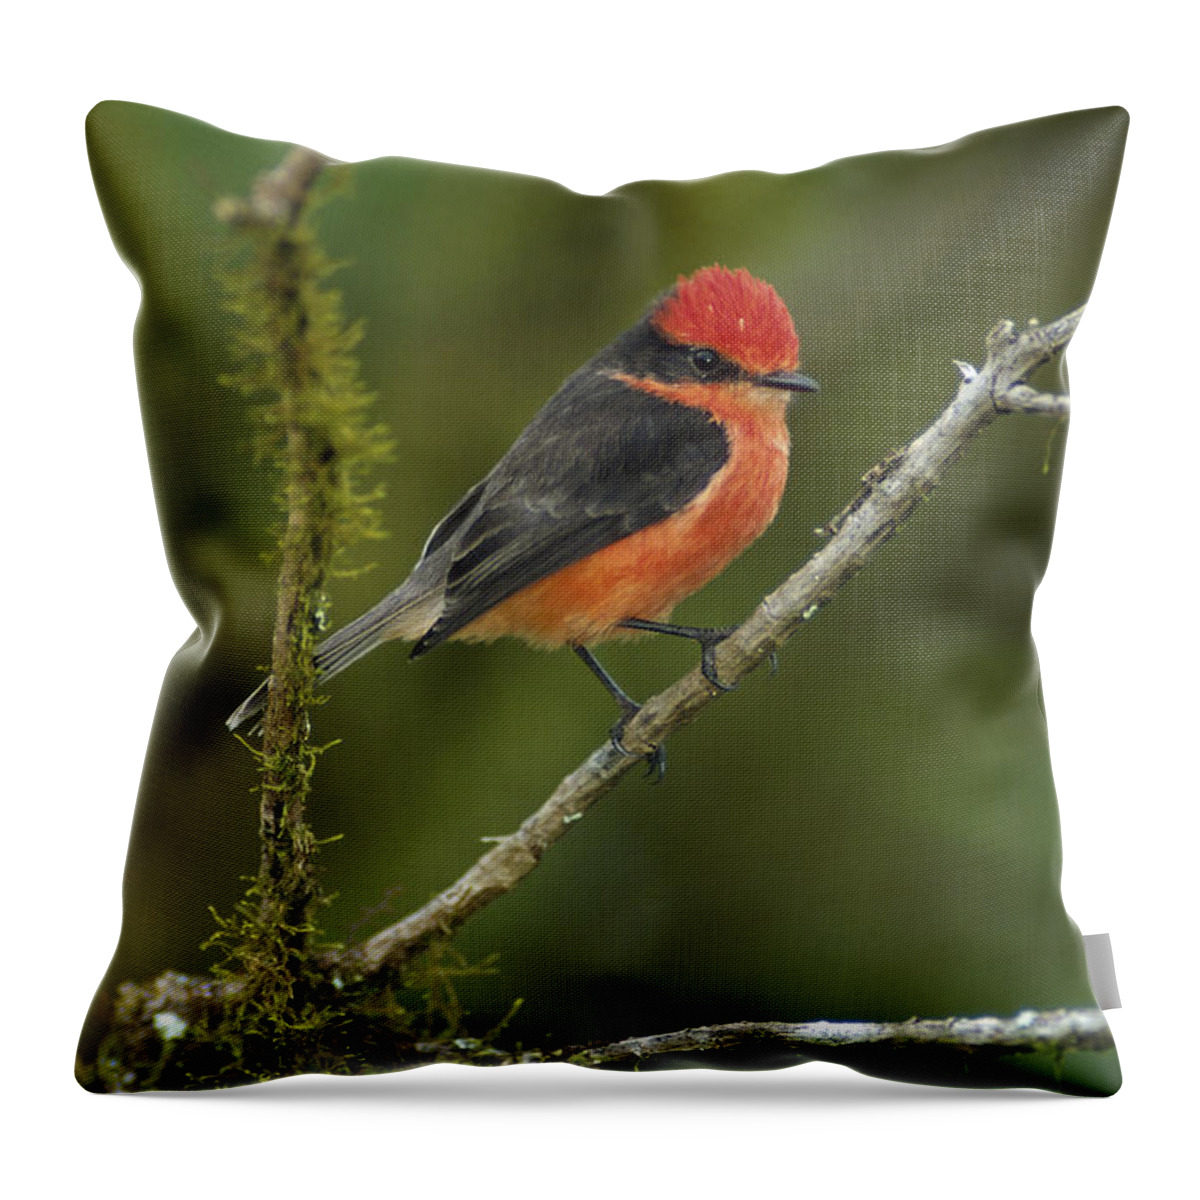 Feb0514 Throw Pillow featuring the photograph Vermilion Flycatcher Male In Scalesia by Tui De Roy